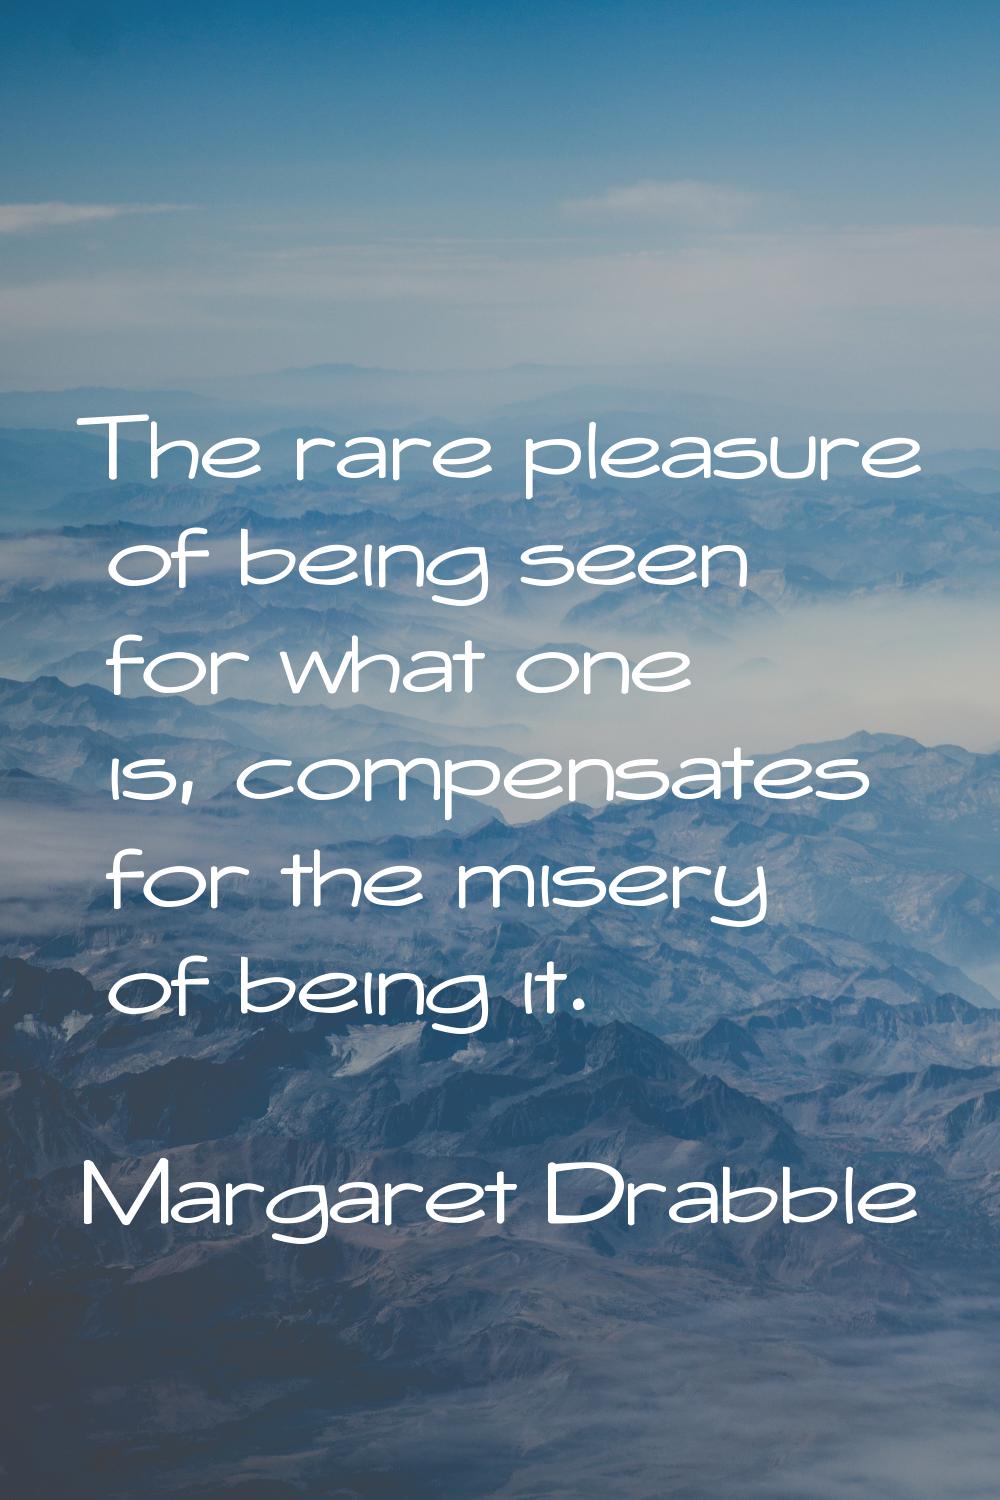 The rare pleasure of being seen for what one is, compensates for the misery of being it.